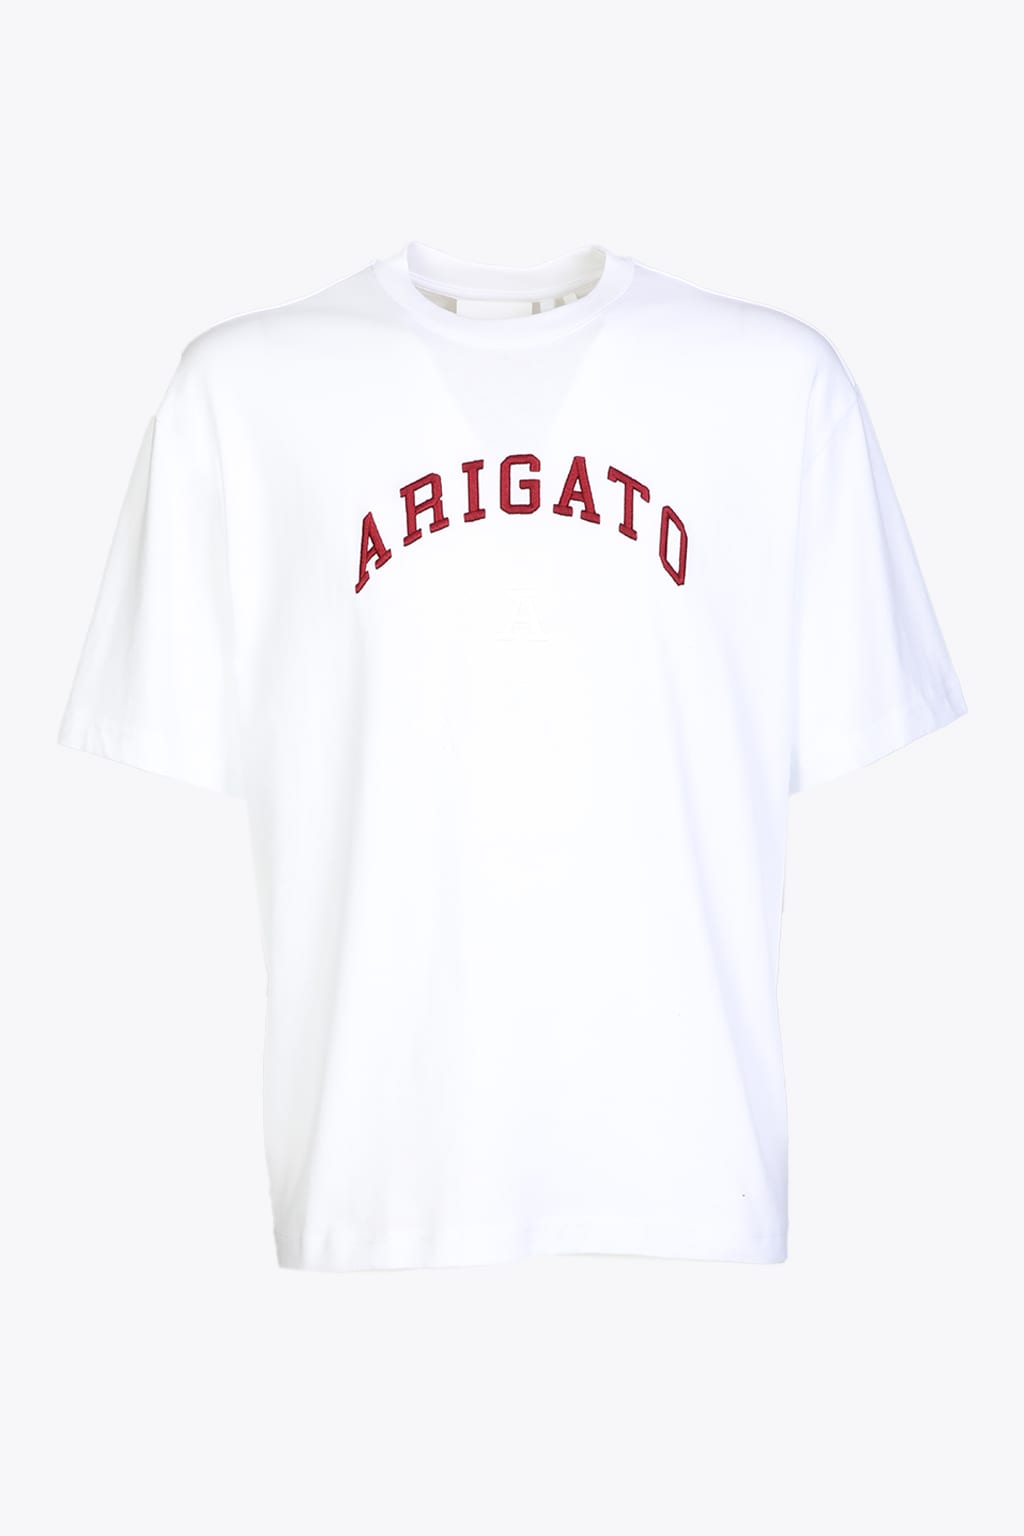 Axel Arigato Arigato University Embroidered T-shirt White cotton t-shirt with logo embroidery - Arigato university emb t-shirt